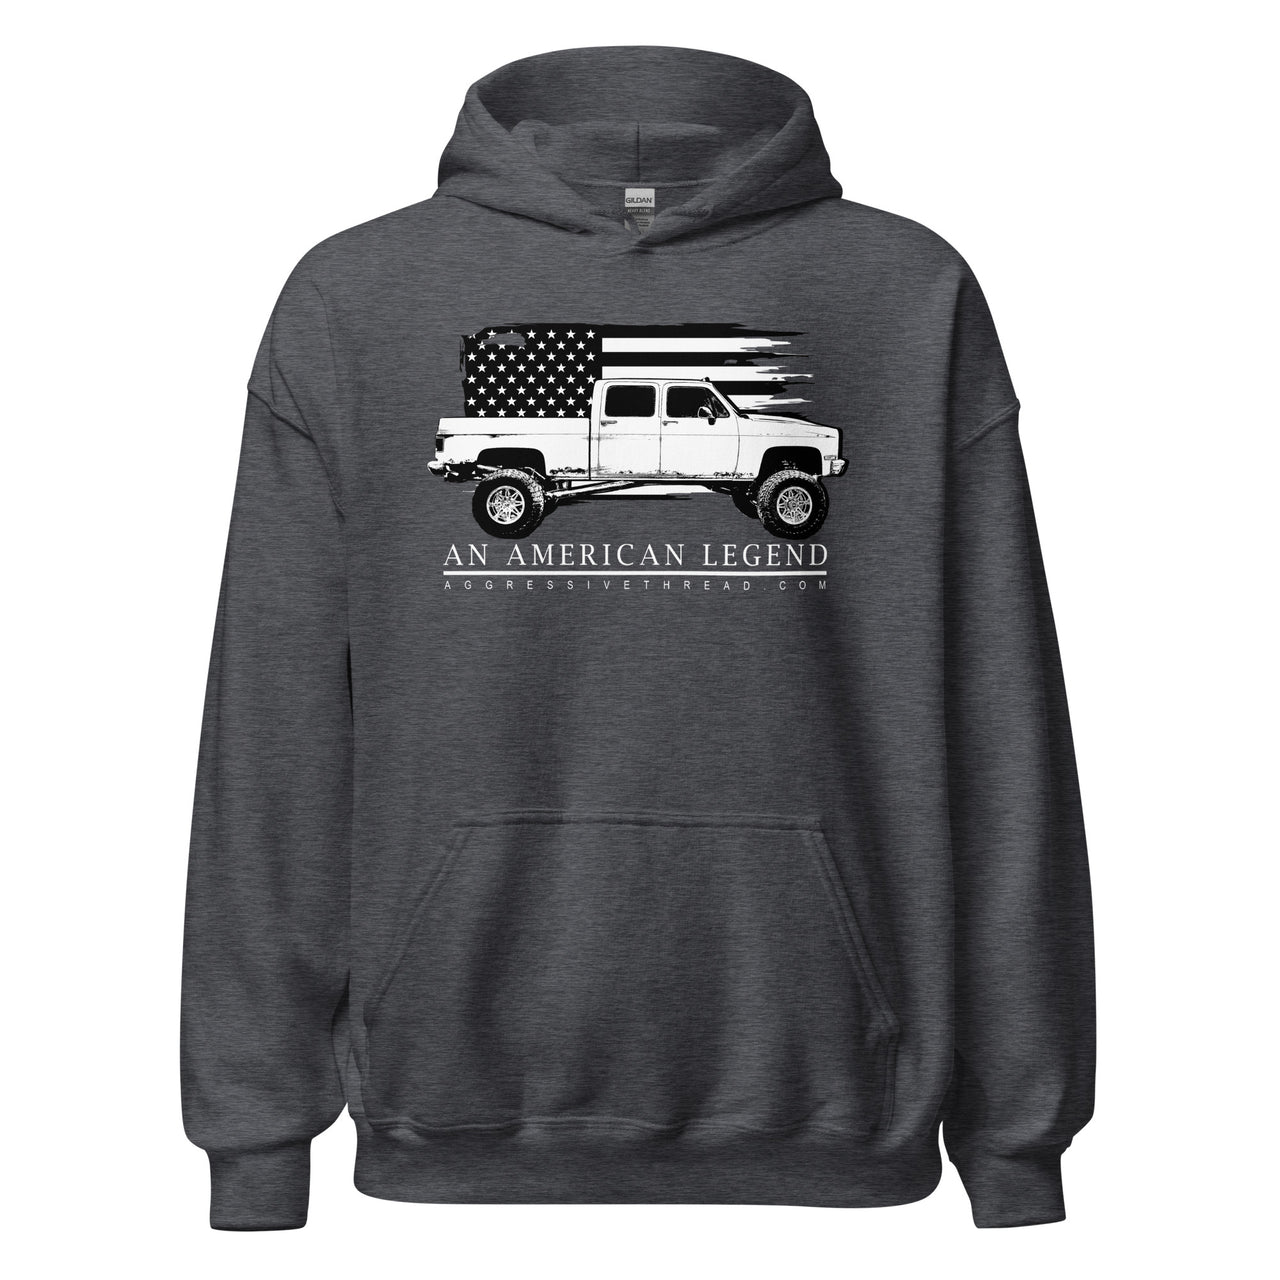 Square Body Truck Hoodie, Sweatshirt Based on 80s Crew Cab Pickup-In-Dark Heather-From Aggressive Thread